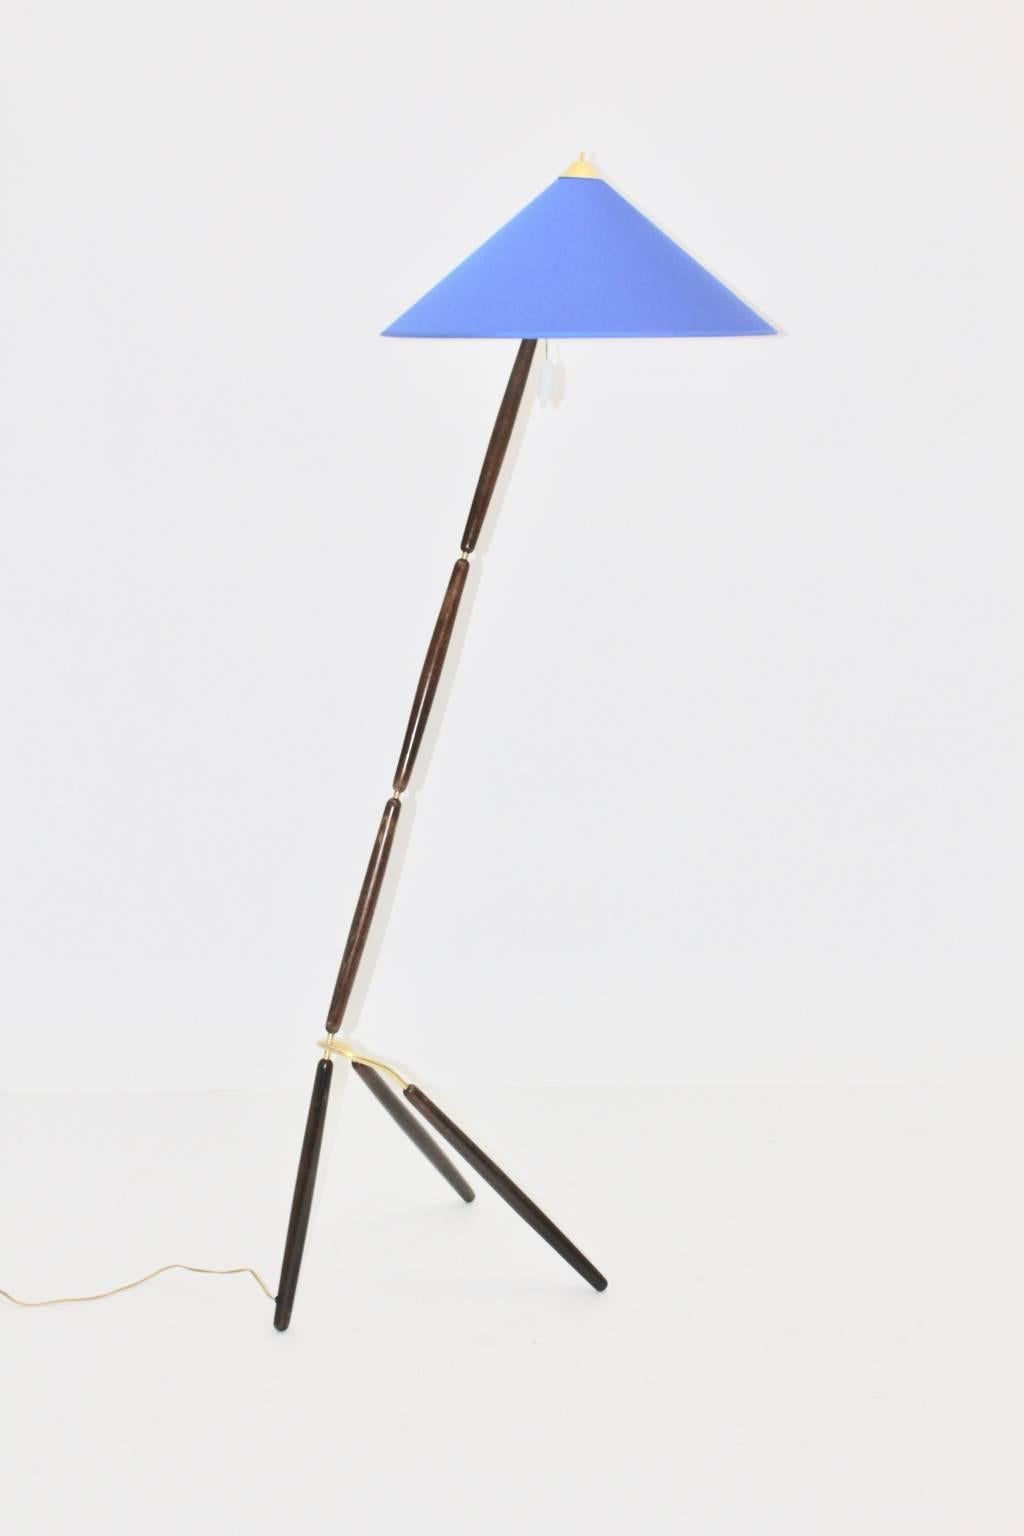 Brass and beech vintage Art Deco floor lamp, which shows design features, which are very similar to Giuseppe Ostuni Italy, circa 1949.
The renewed lamp shade in its original shape has a blue color tone.
We love the floor lamp for its outstanding